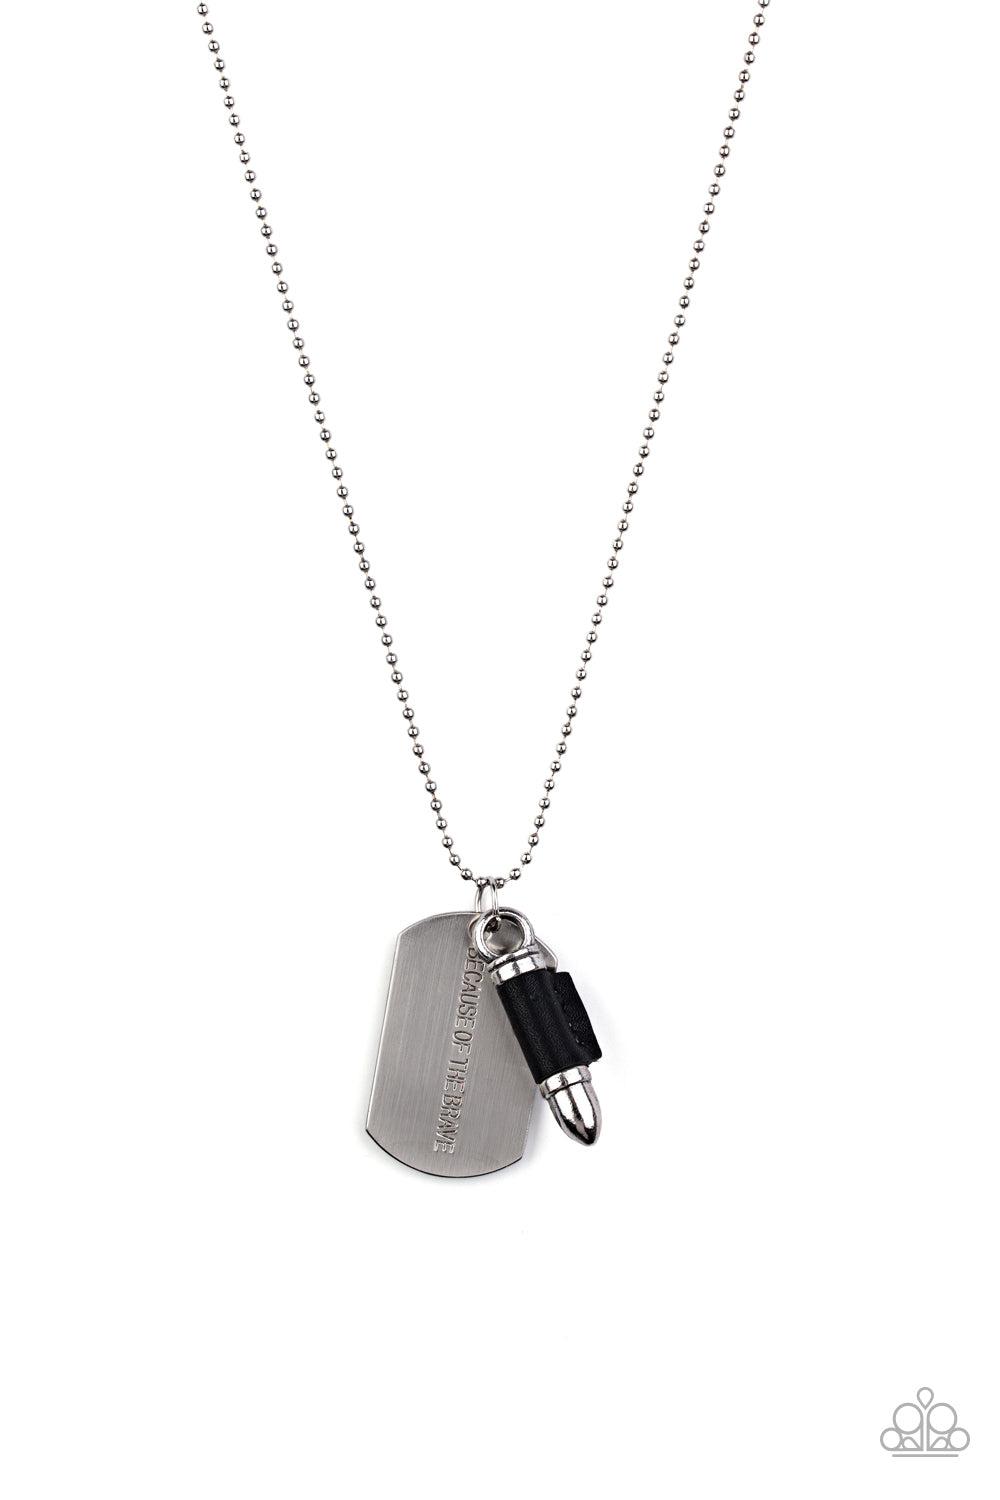 Proud Patriot Black & Silver Bullet Necklace - Paparazzi Accessories- lightbox - CarasShop.com - $5 Jewelry by Cara Jewels